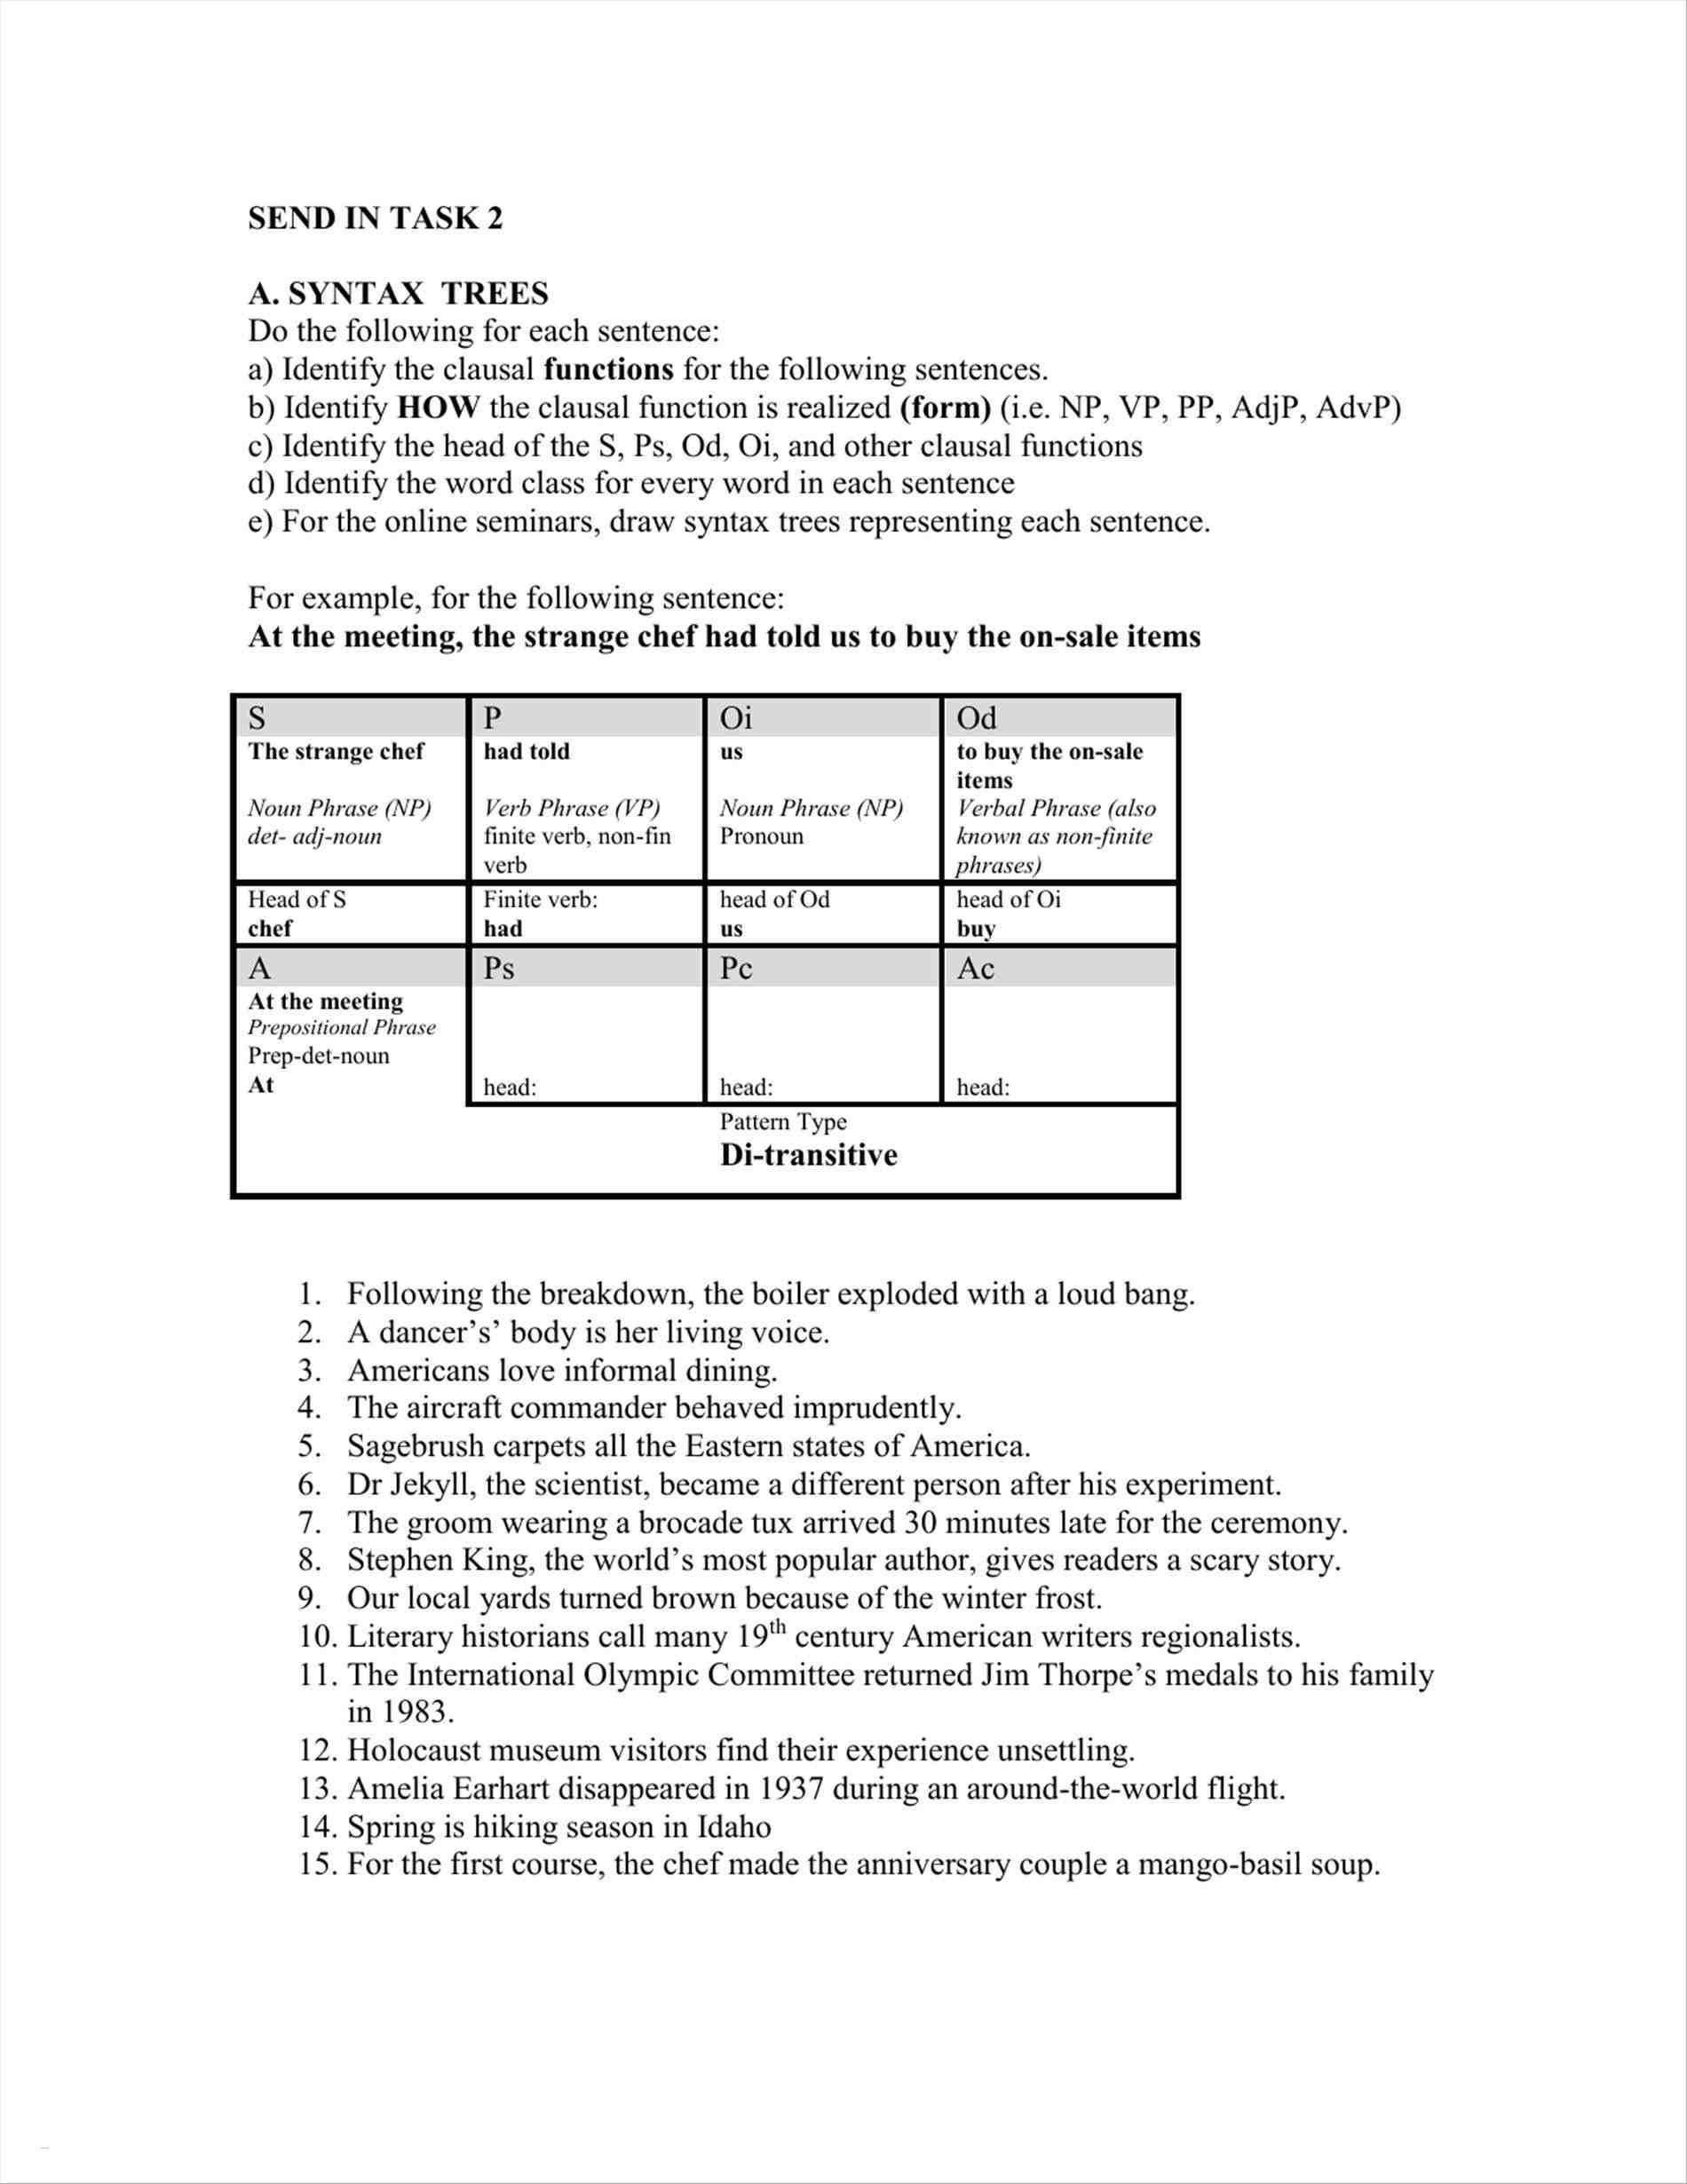 Biological Classification Worksheet  Worksheet Idea Template For Worksheet Power And Ohm039S Law Answer Key